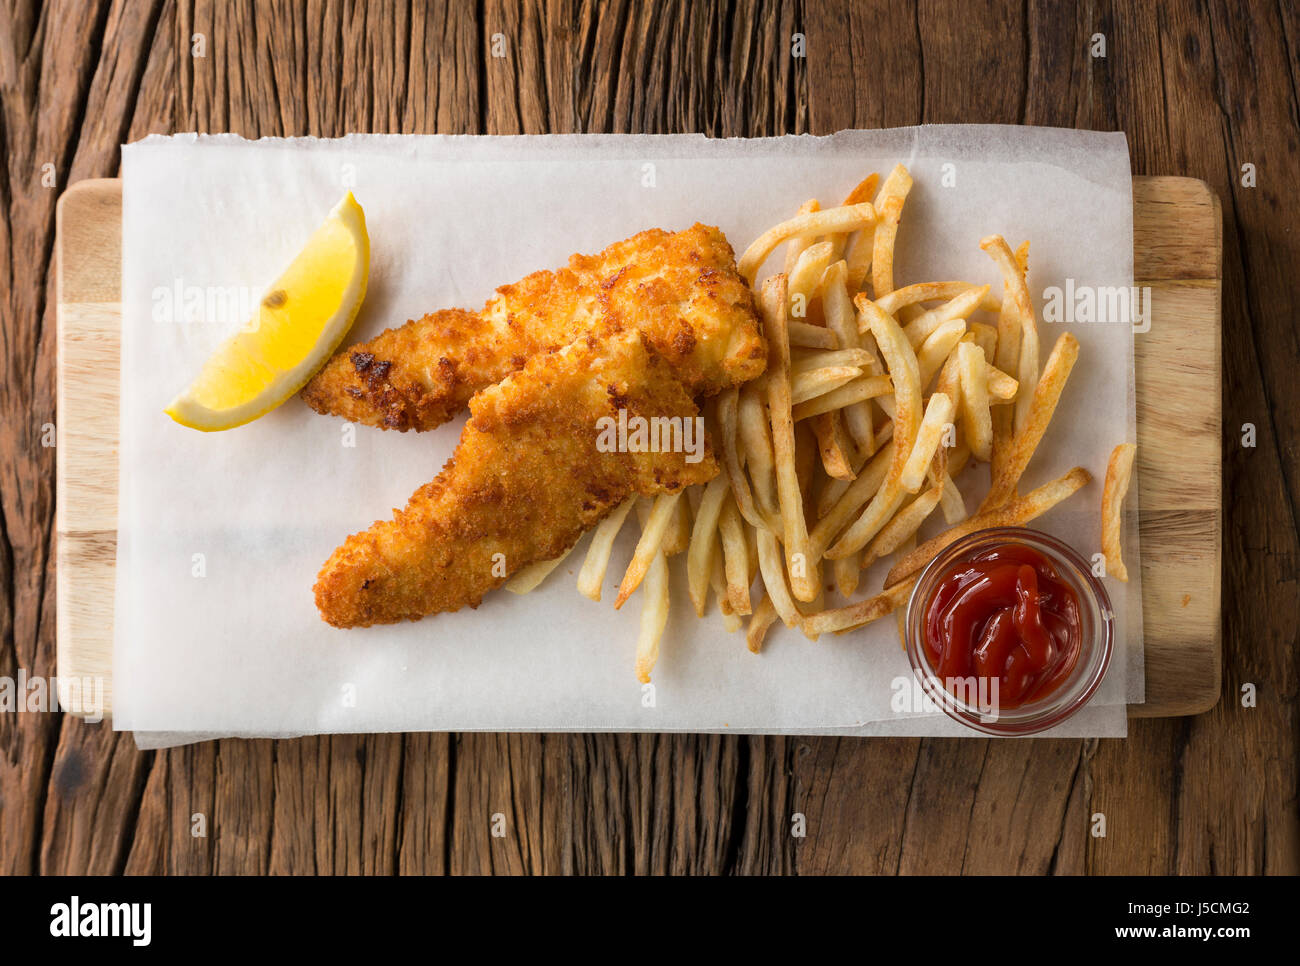 Freshly cooked fish and chips on a rustic wooden background. Gastropub style food. View from above. Stock Photo